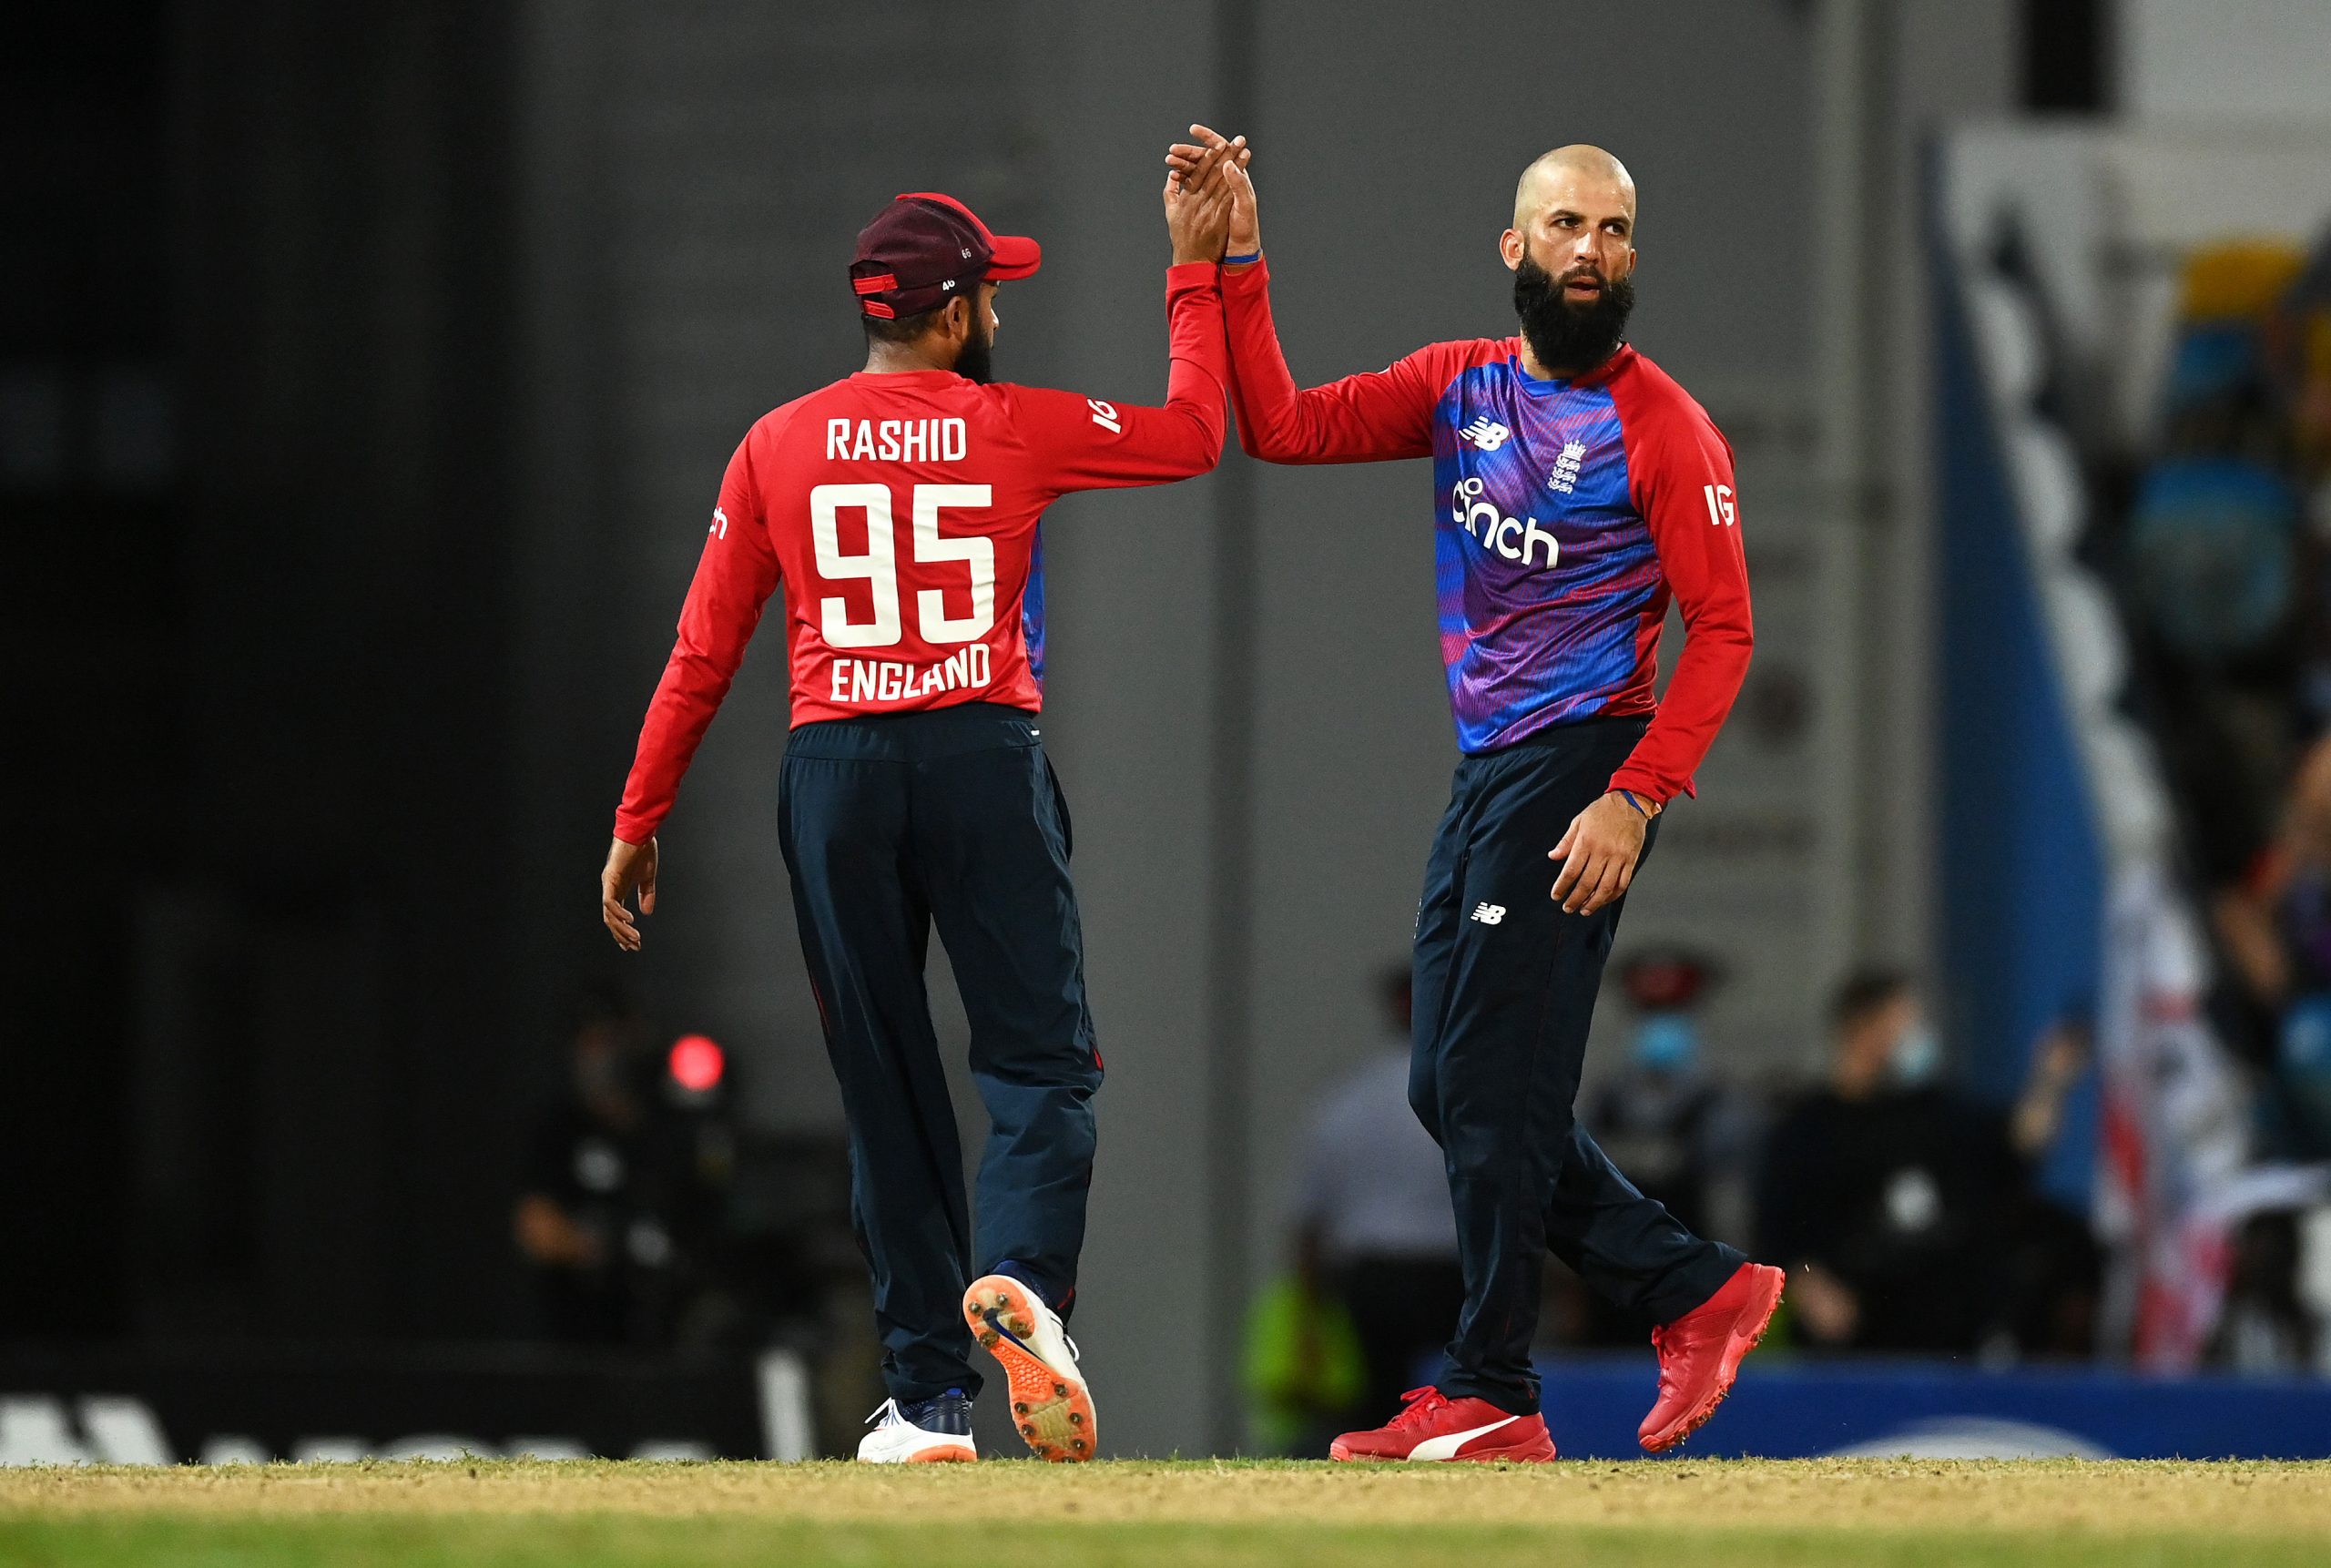 4th T20I: Moeen Ali leads England’s win over West Indies, sets up series decider